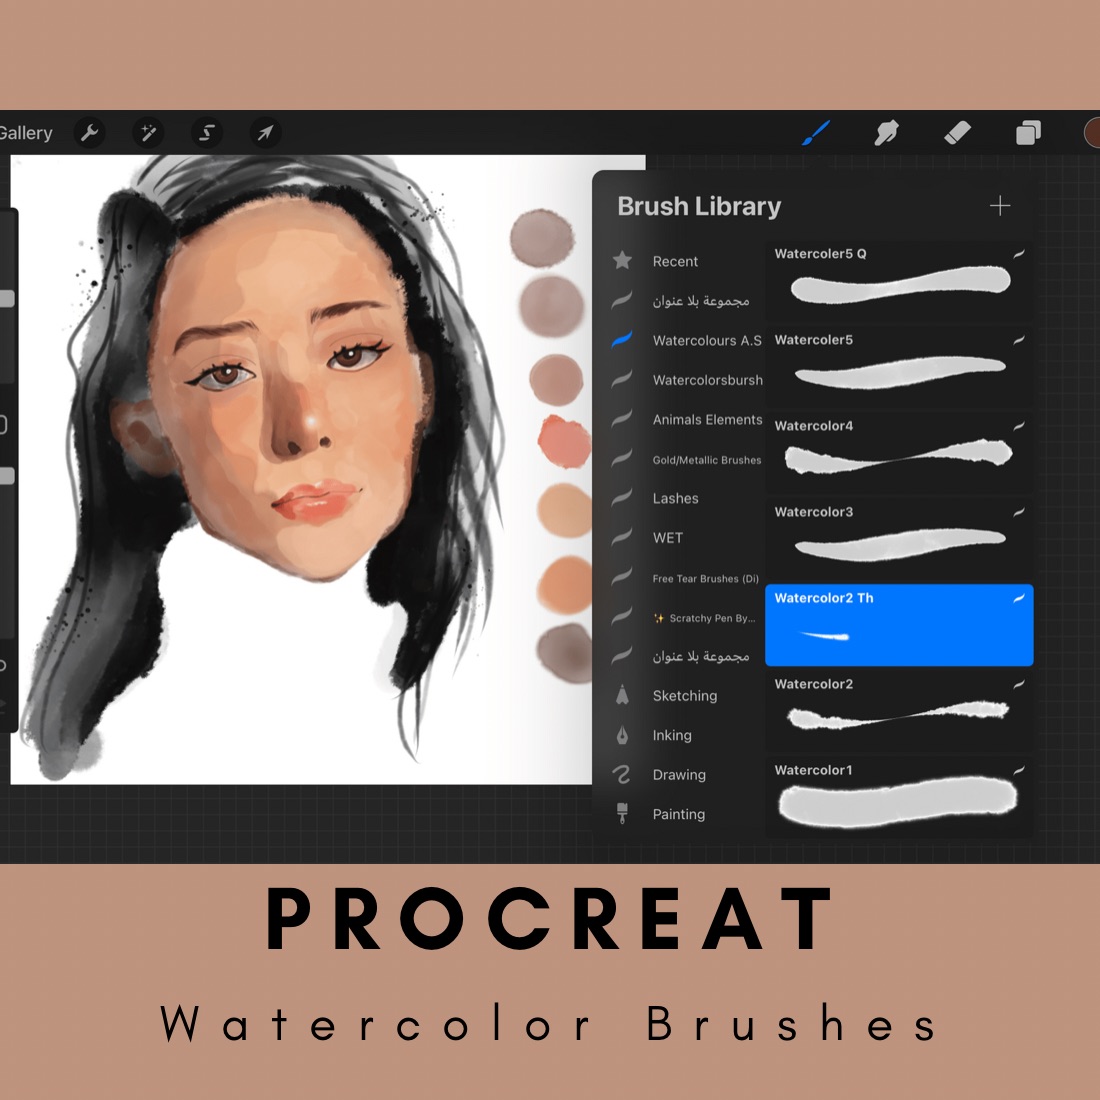 Procreate Watercolor Brushes, Professional Artist, Architecture, Watercolor  Brushes, Procreate Watercolor Brush, New Watercolor Brush 